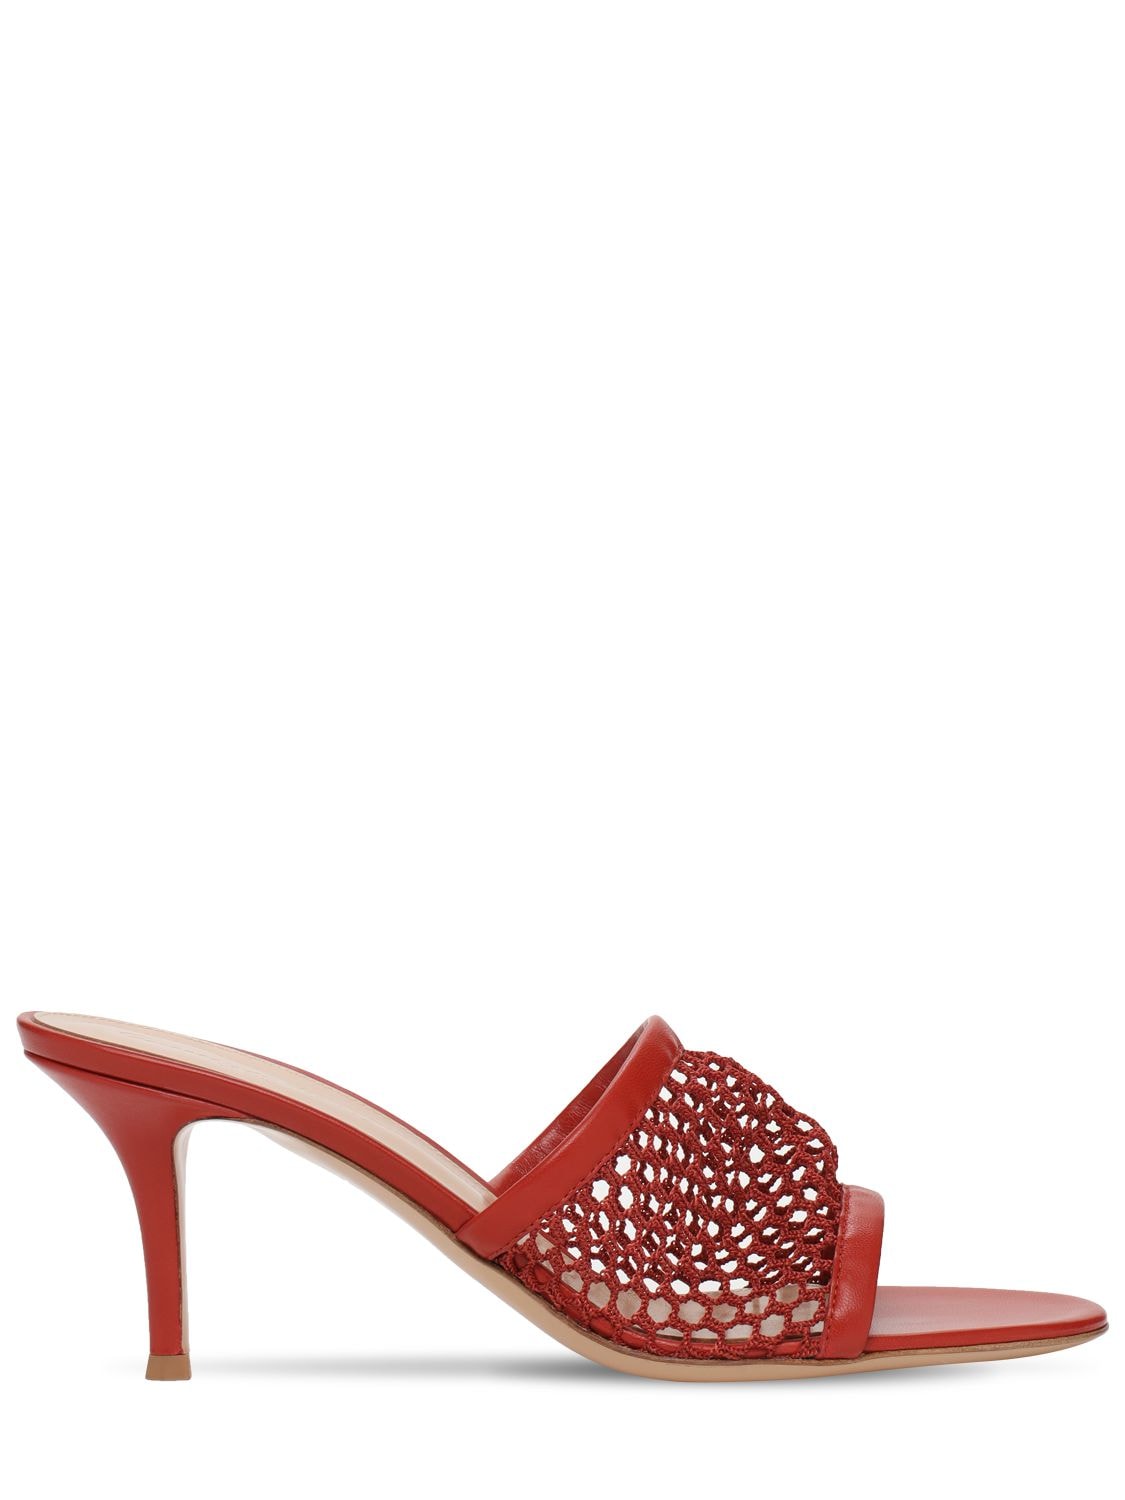 Gianvito Rossi 70mm Fishnet Mesh & Leather Mules In Red | ModeSens